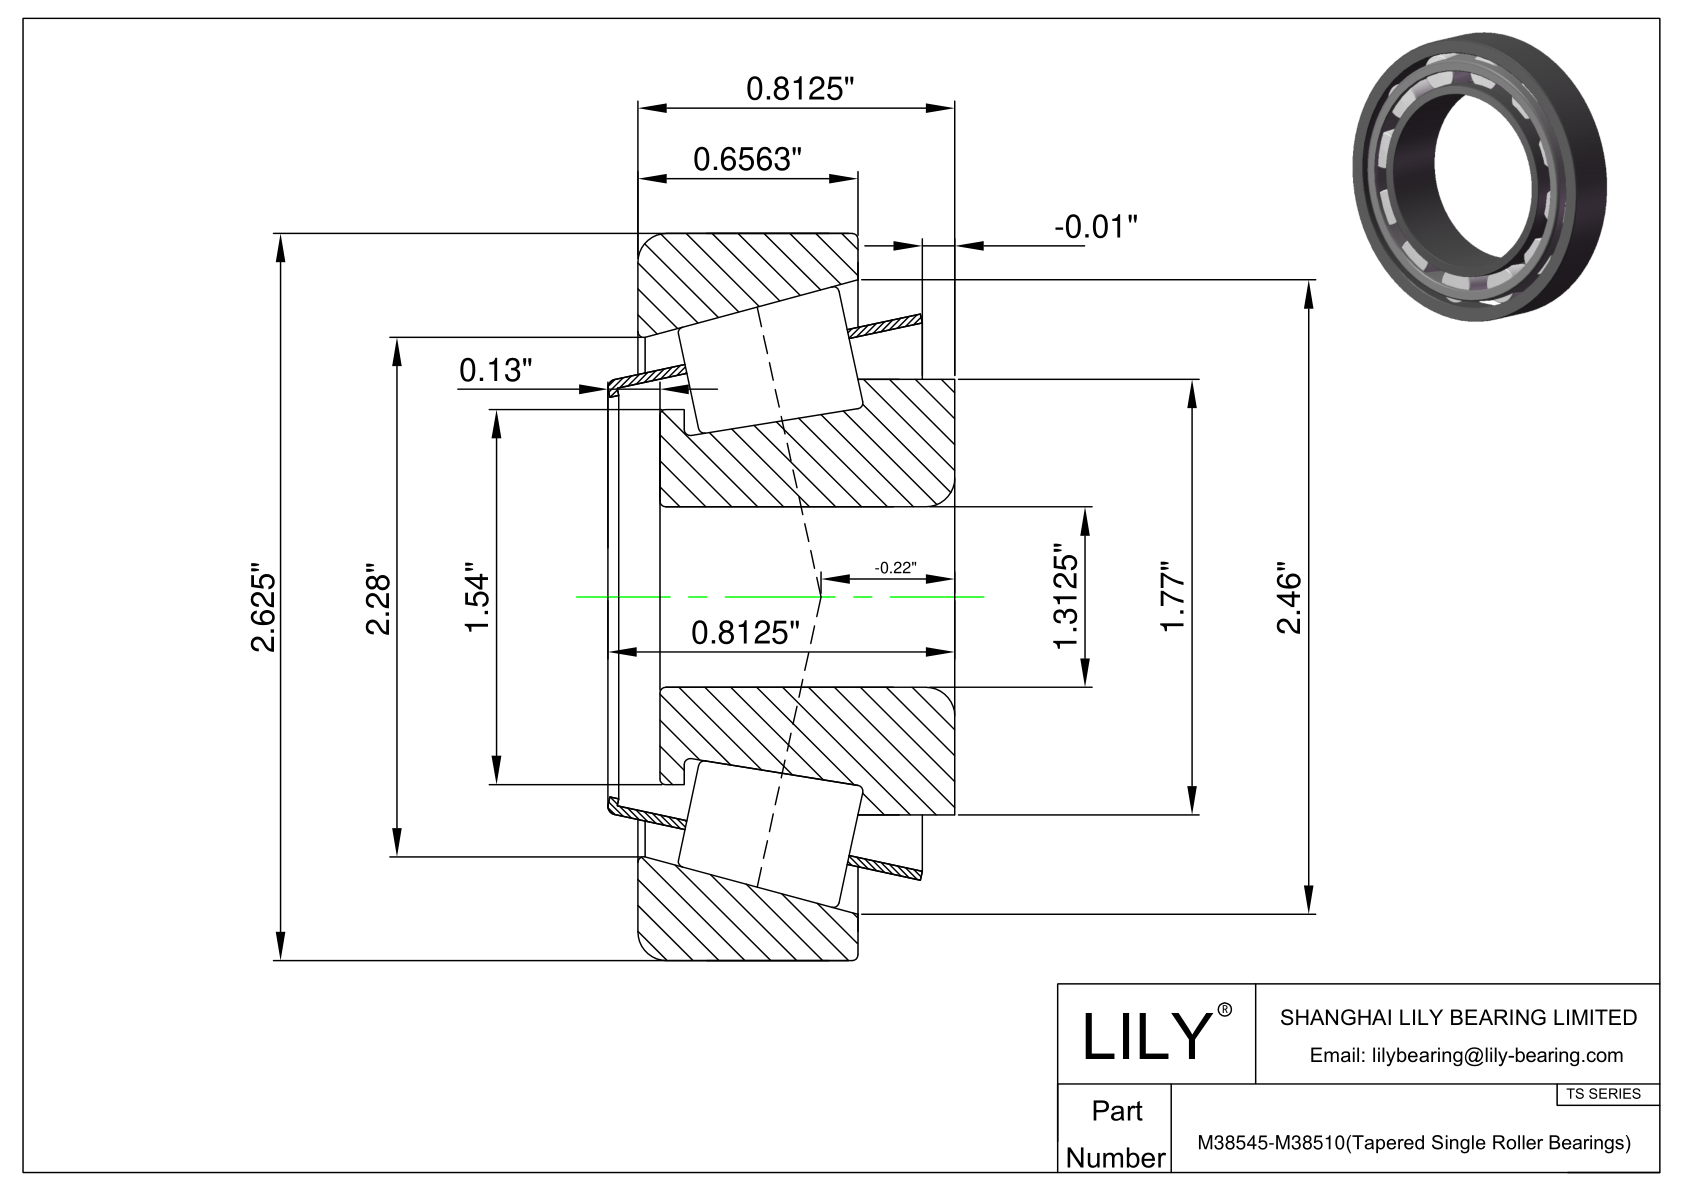 M38545-M38510 TS (Tapered Single Roller Bearings) (Imperial) cad drawing